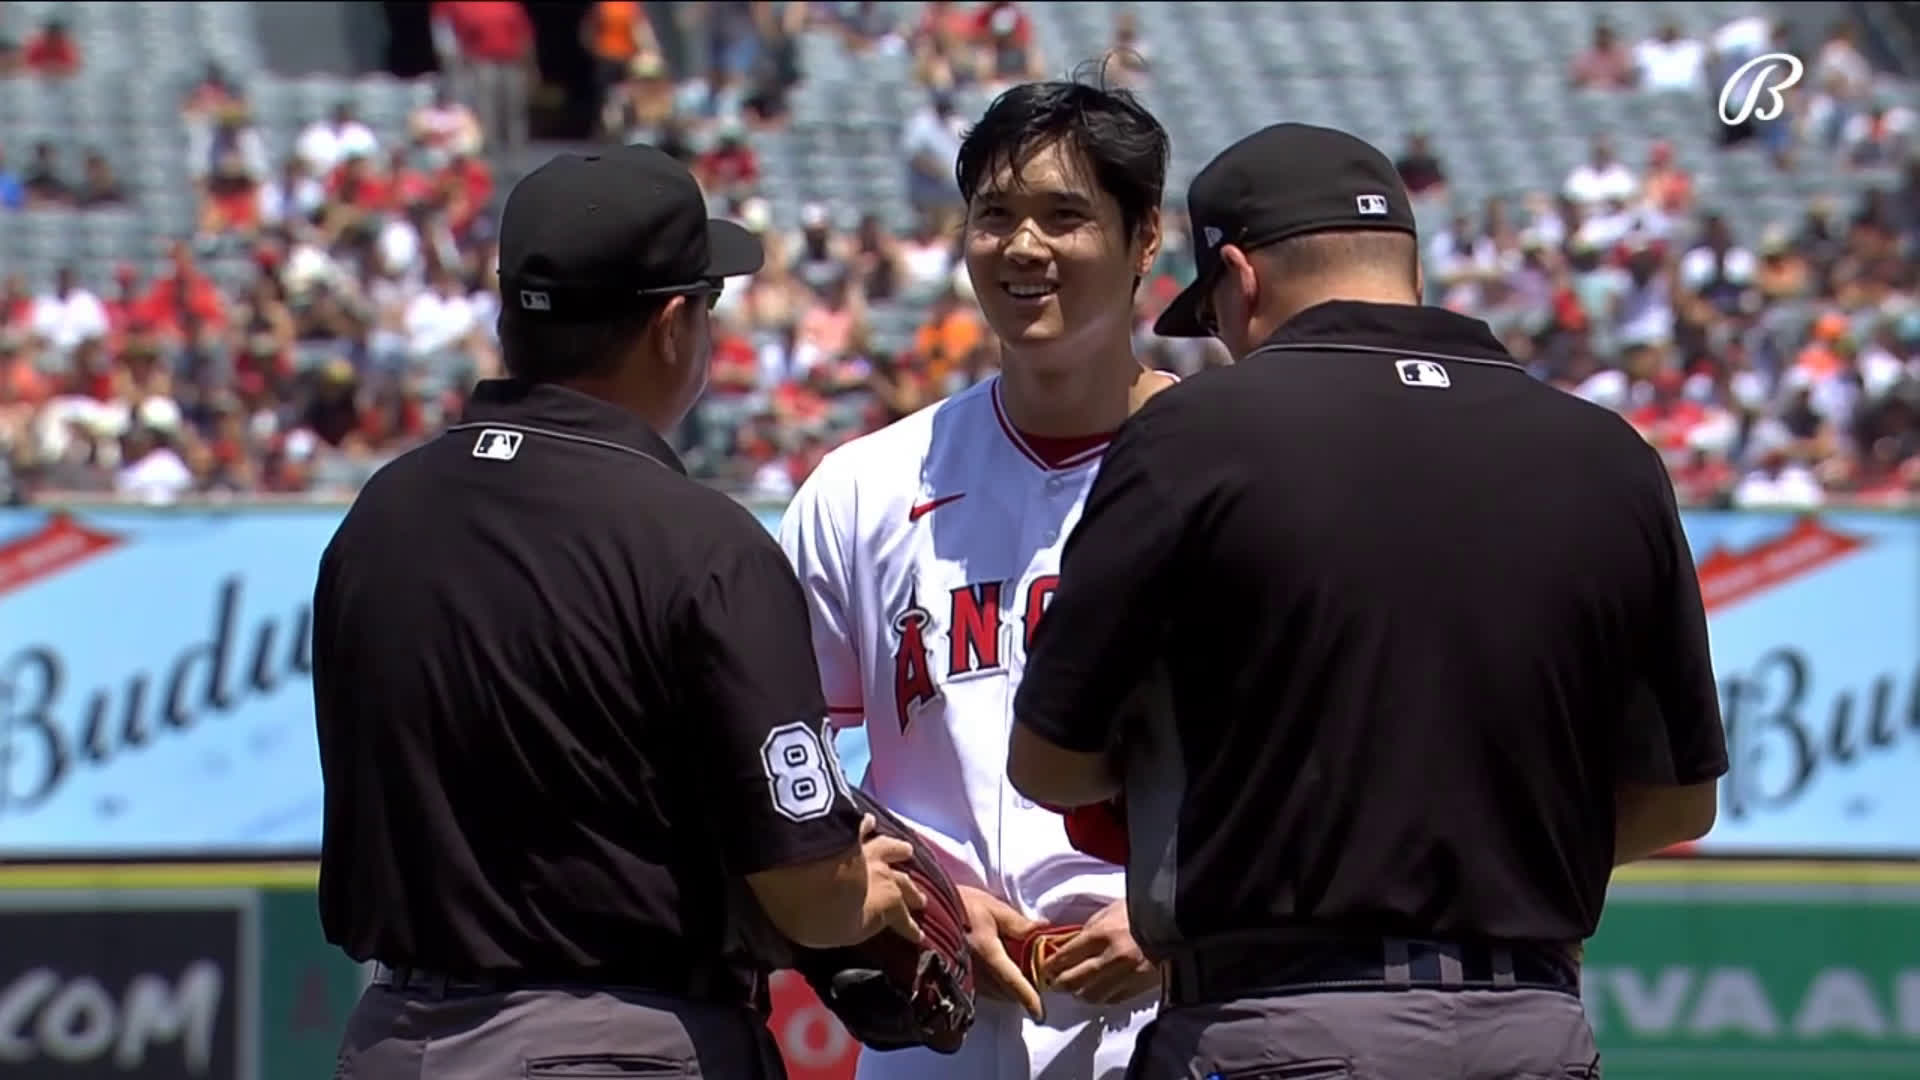 Shohei Ohtani's Personal Life, Siblings, Parents, Wife, Girlfriend